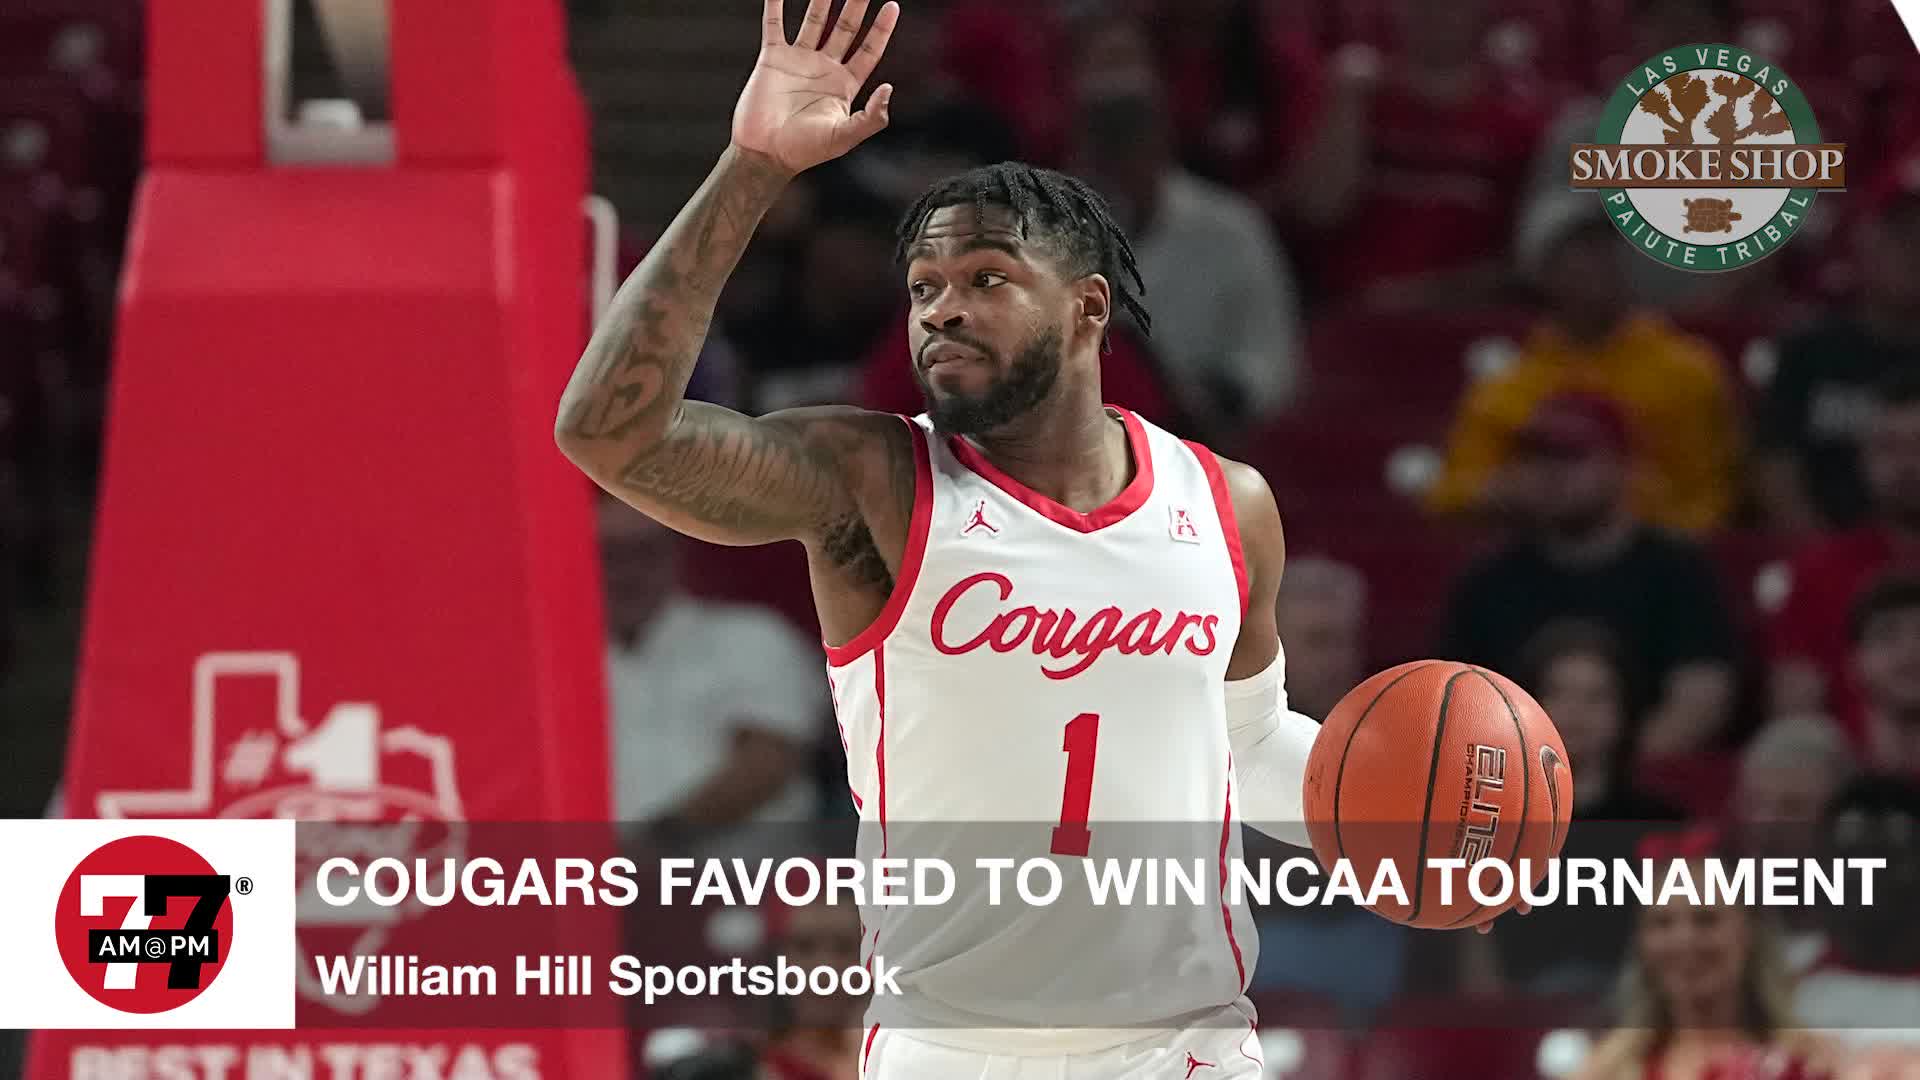 Cougars favored to win NCAA Tournament